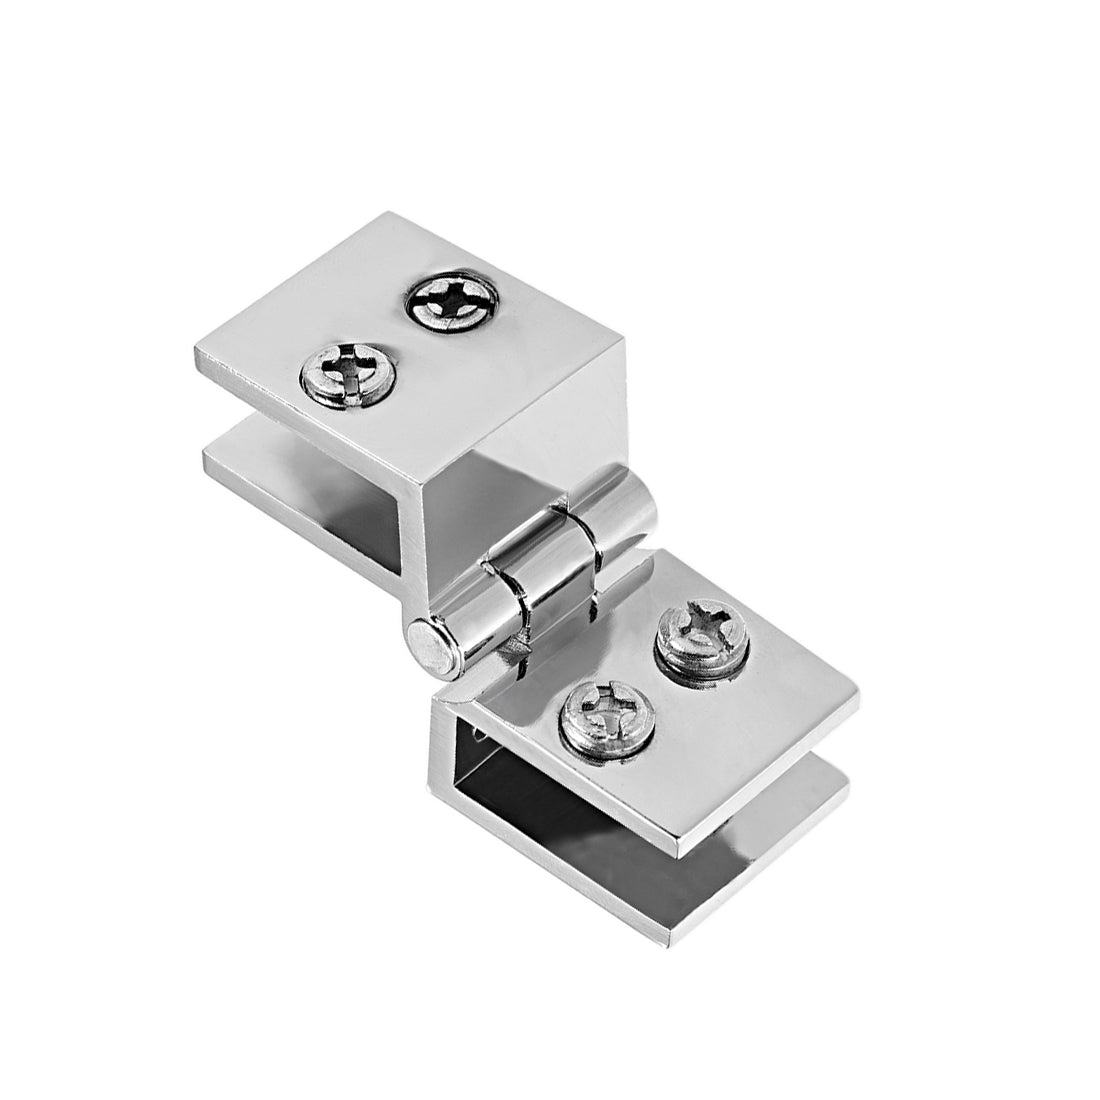 uxcell Uxcell Glass Door Hinge - 90 Degree Cupboard Showcase Cabinet Door Hinge Glass Clamp ,Zinc Alloy , for 5-8mm Glass Thickness 2Pcs